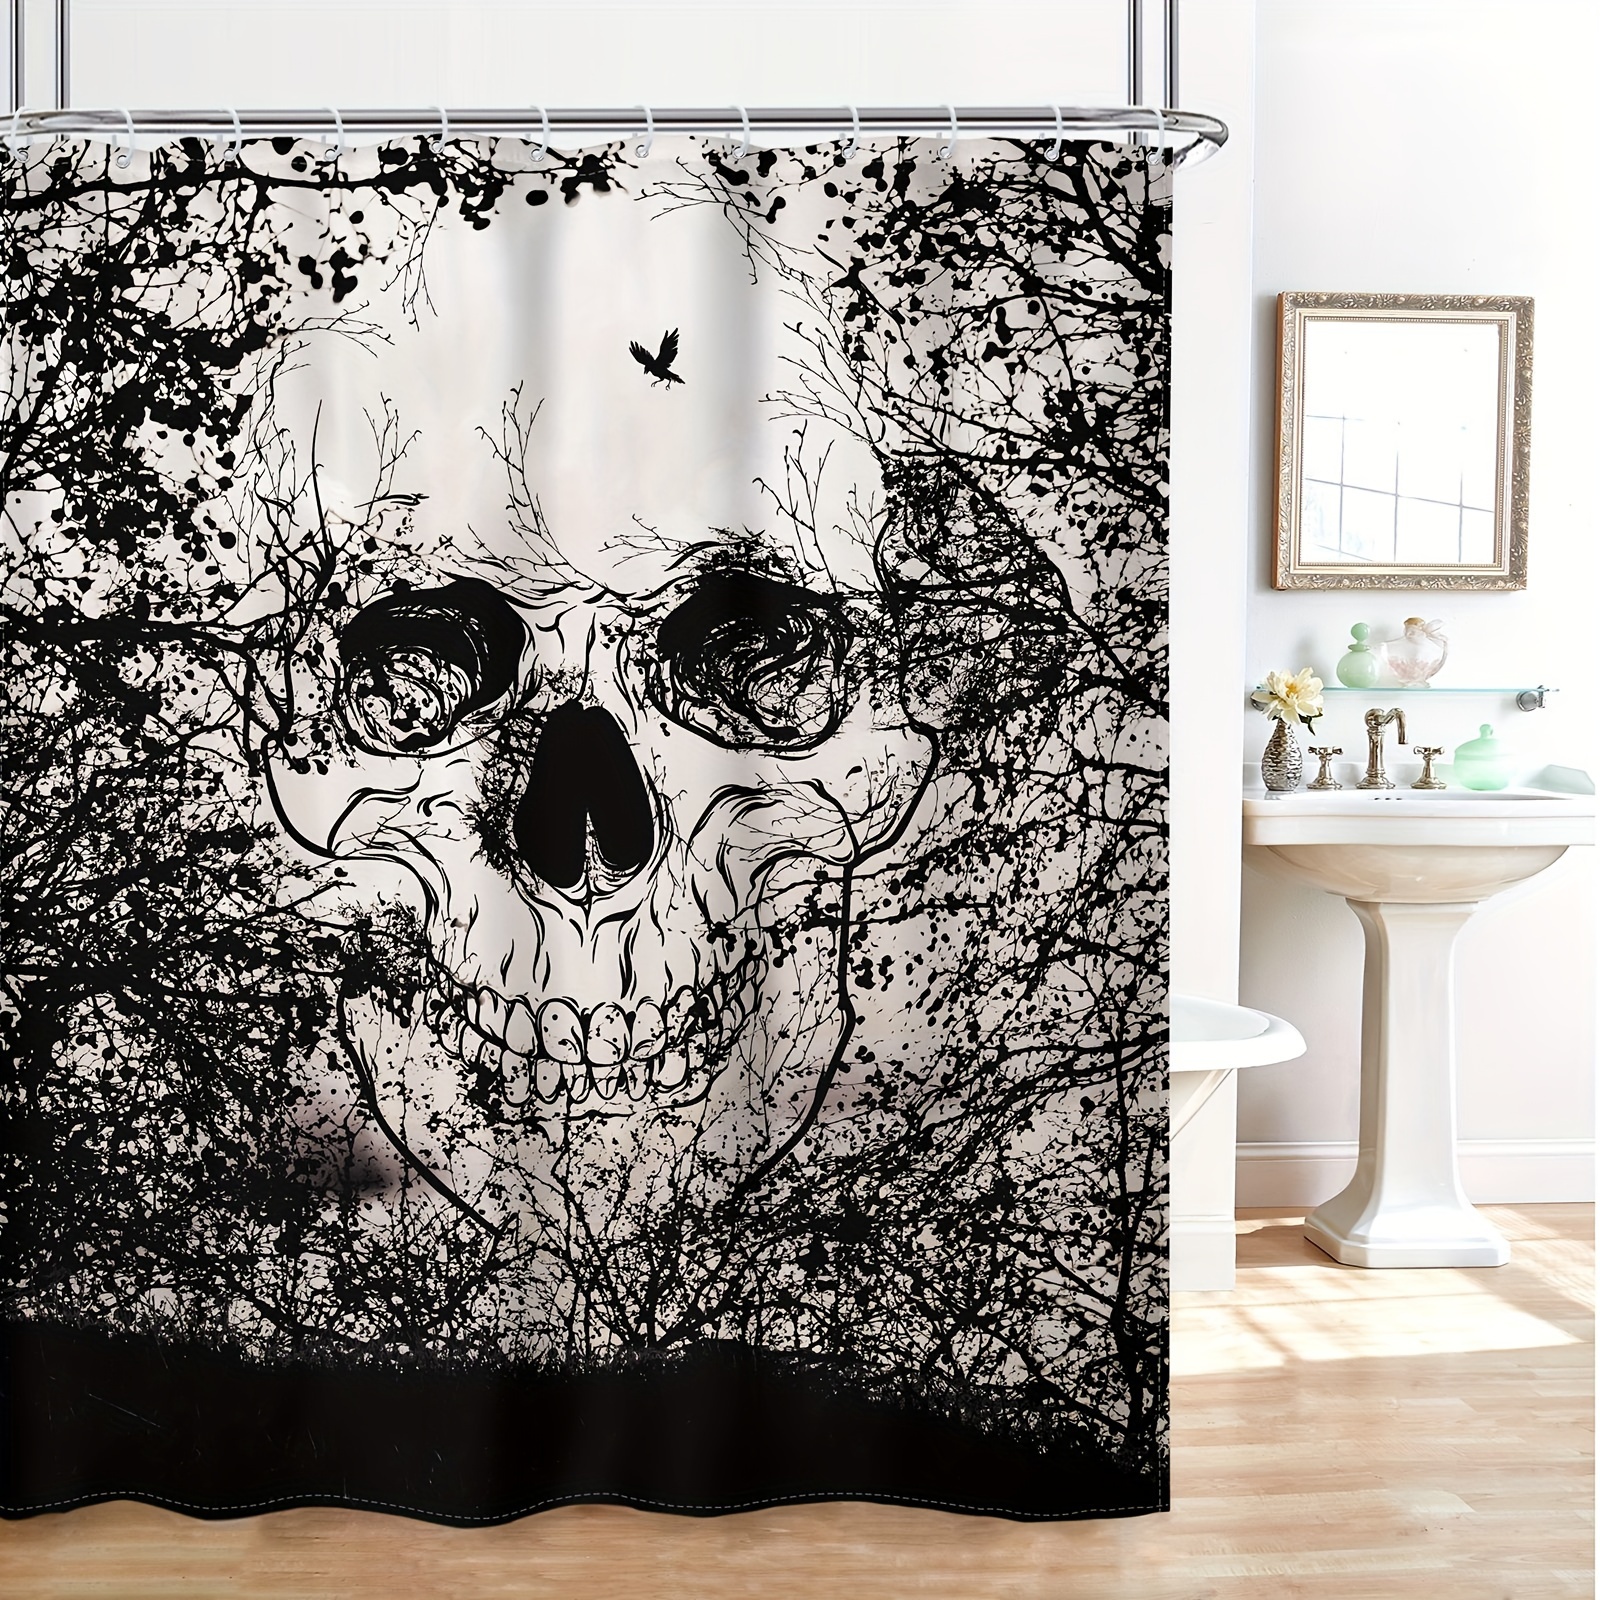 

1pc Gothic Shower Curtain, Polyester Fabric, Black Horror Tree And Skeleton Design, Creepy Cool Unique Sketch Waterproof Bath Decor With 12 Plastic Hooks For Home Bathroom Tub Decoration